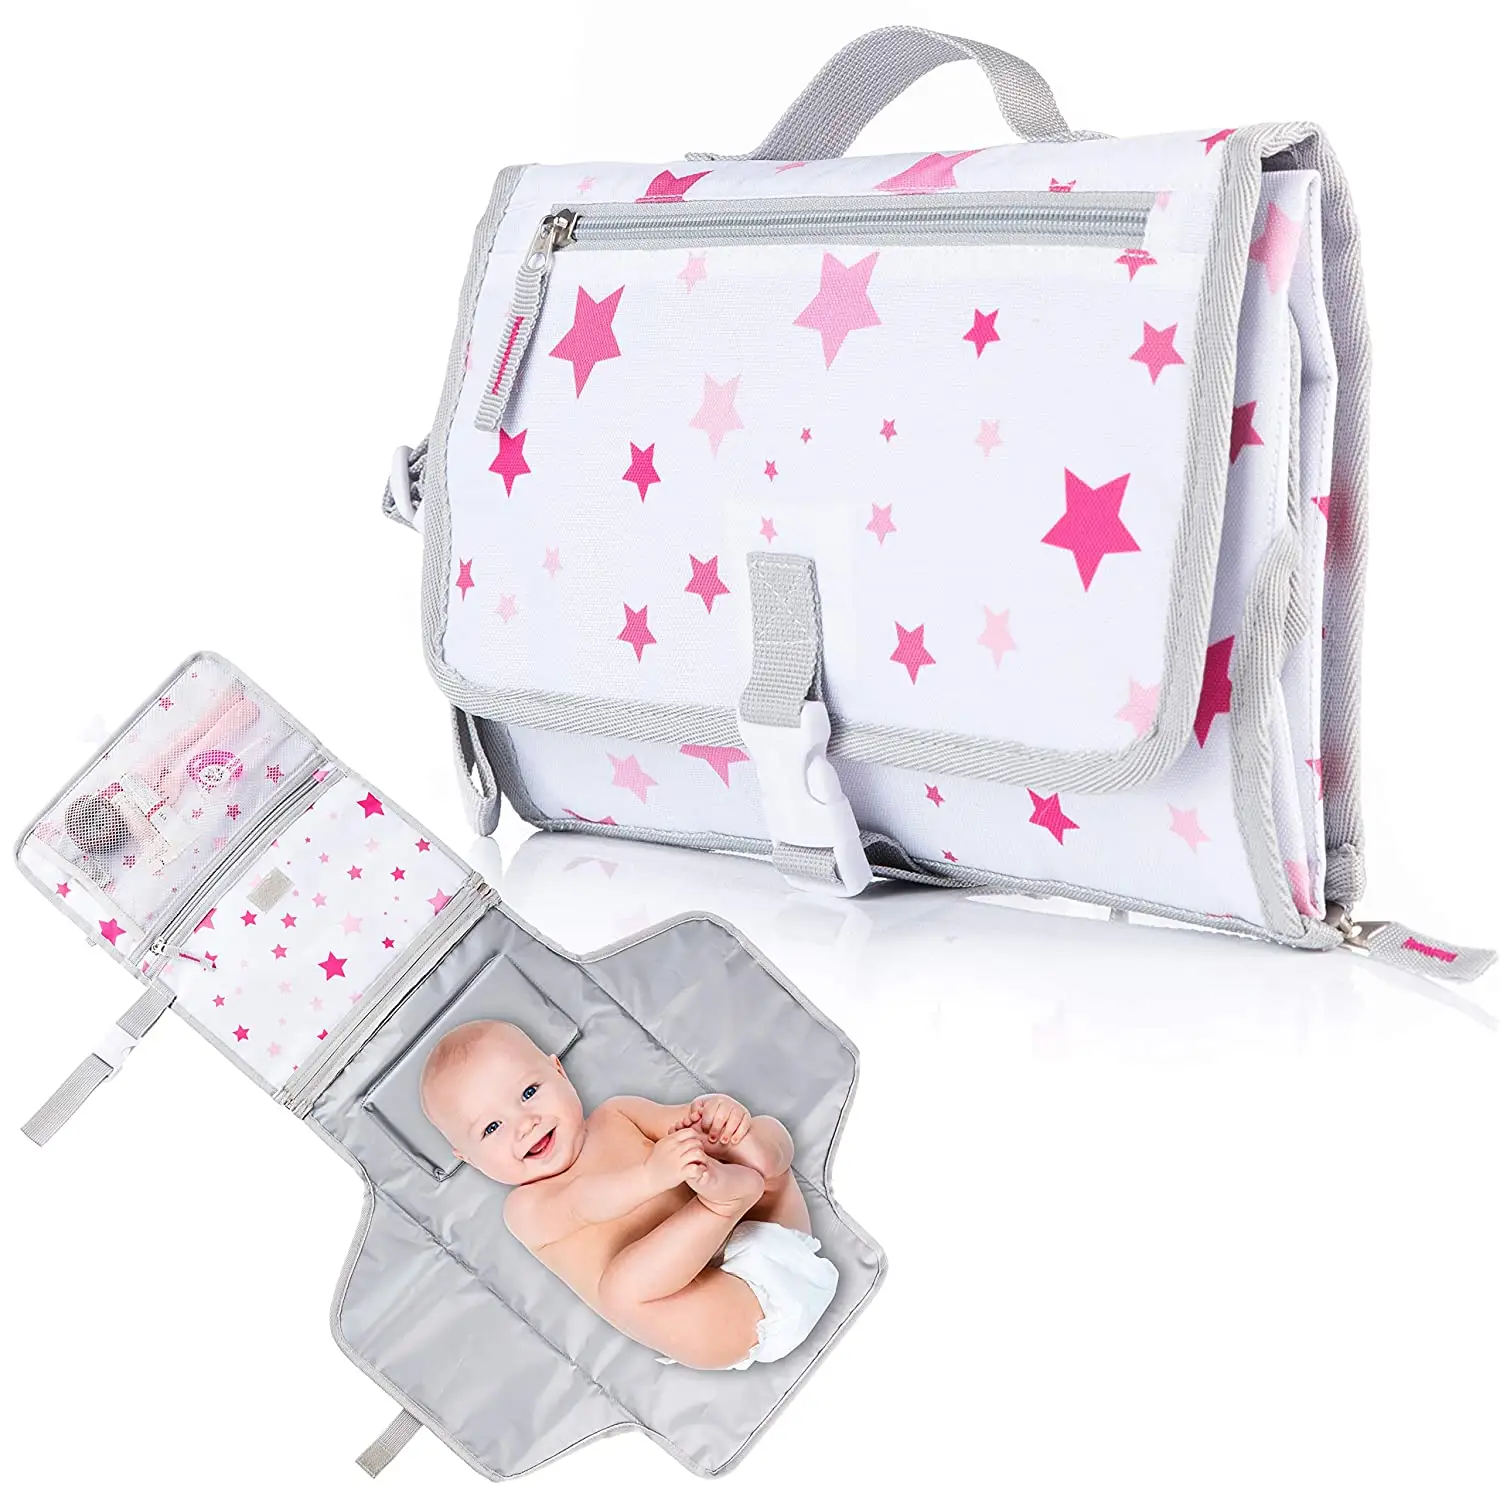 Custom Lightweight High Quality Waterproof Portable Diaper Baby Travel Changing Mat Baby for Baby Care